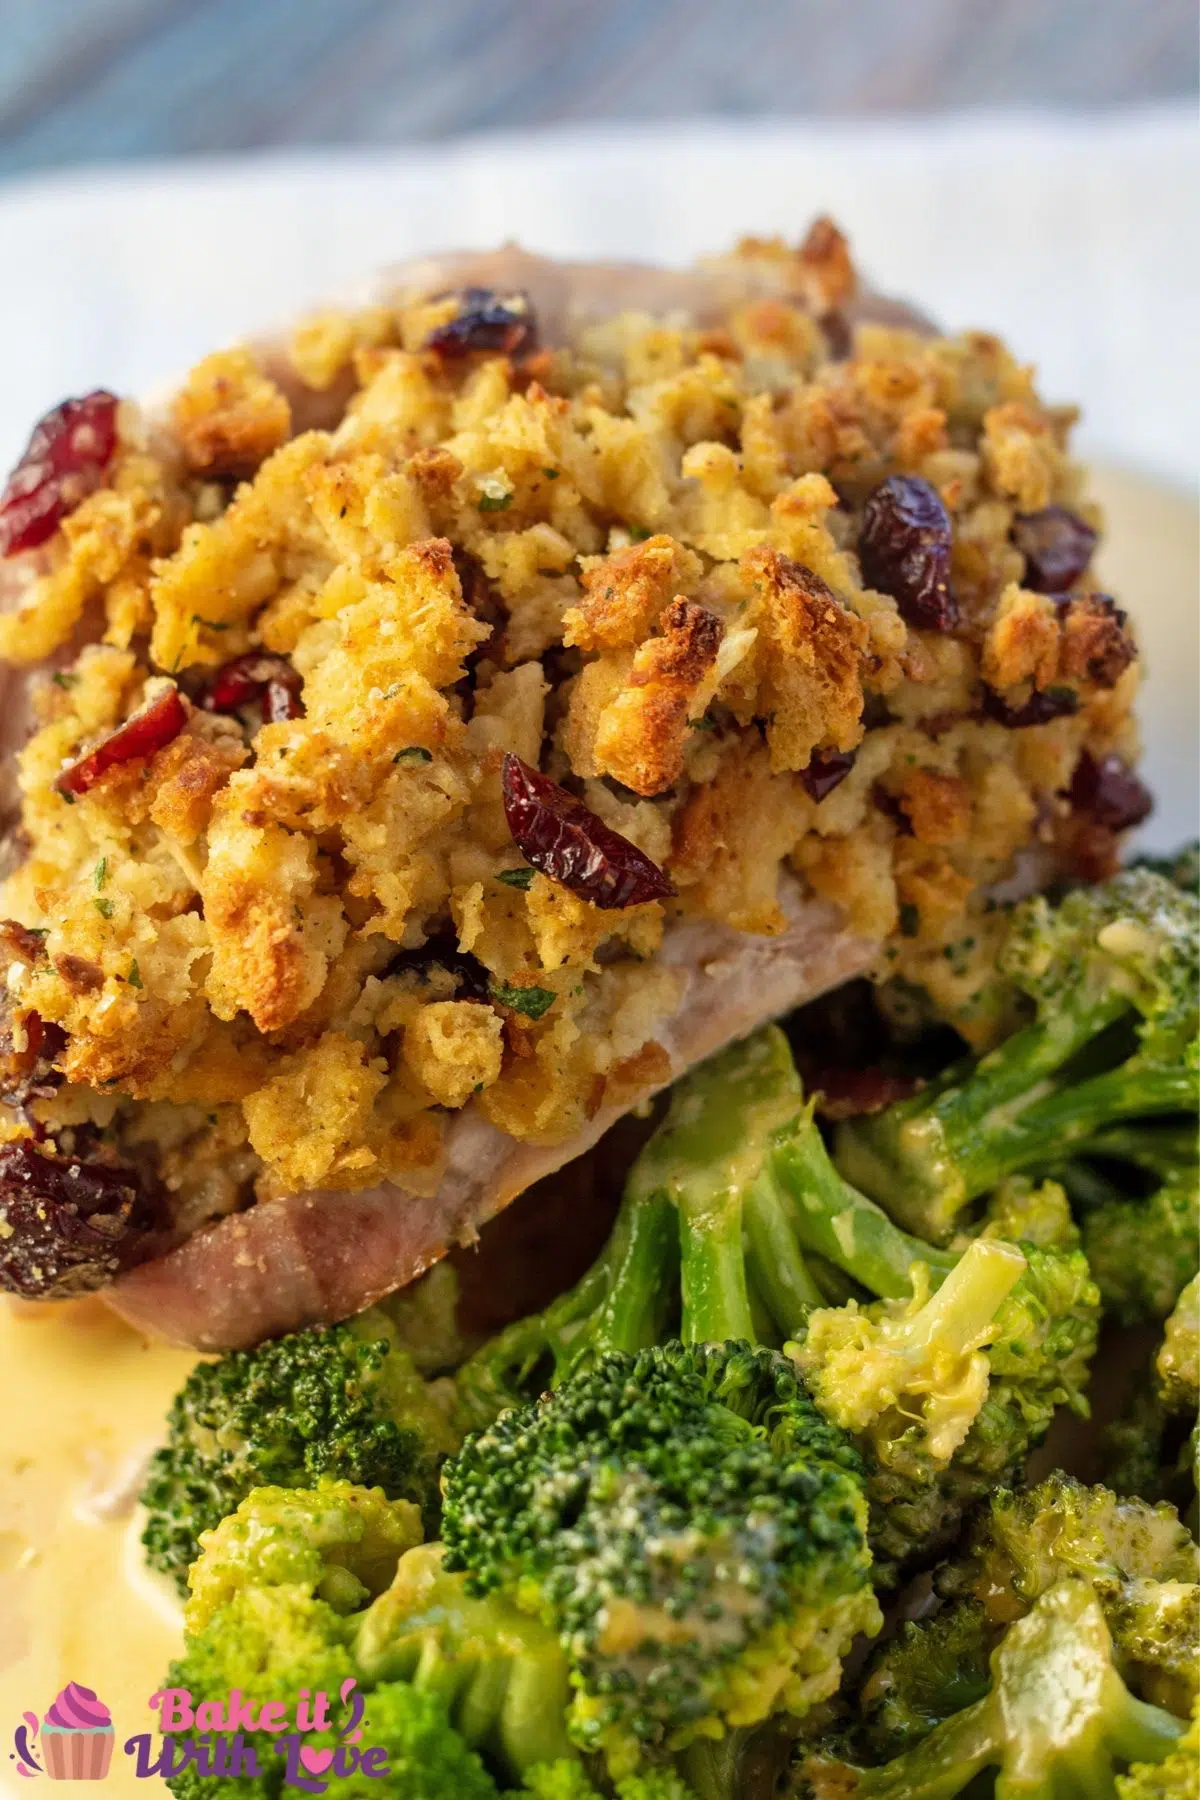 Tall image of the stuffing stuffed pork chops served with broccoli.